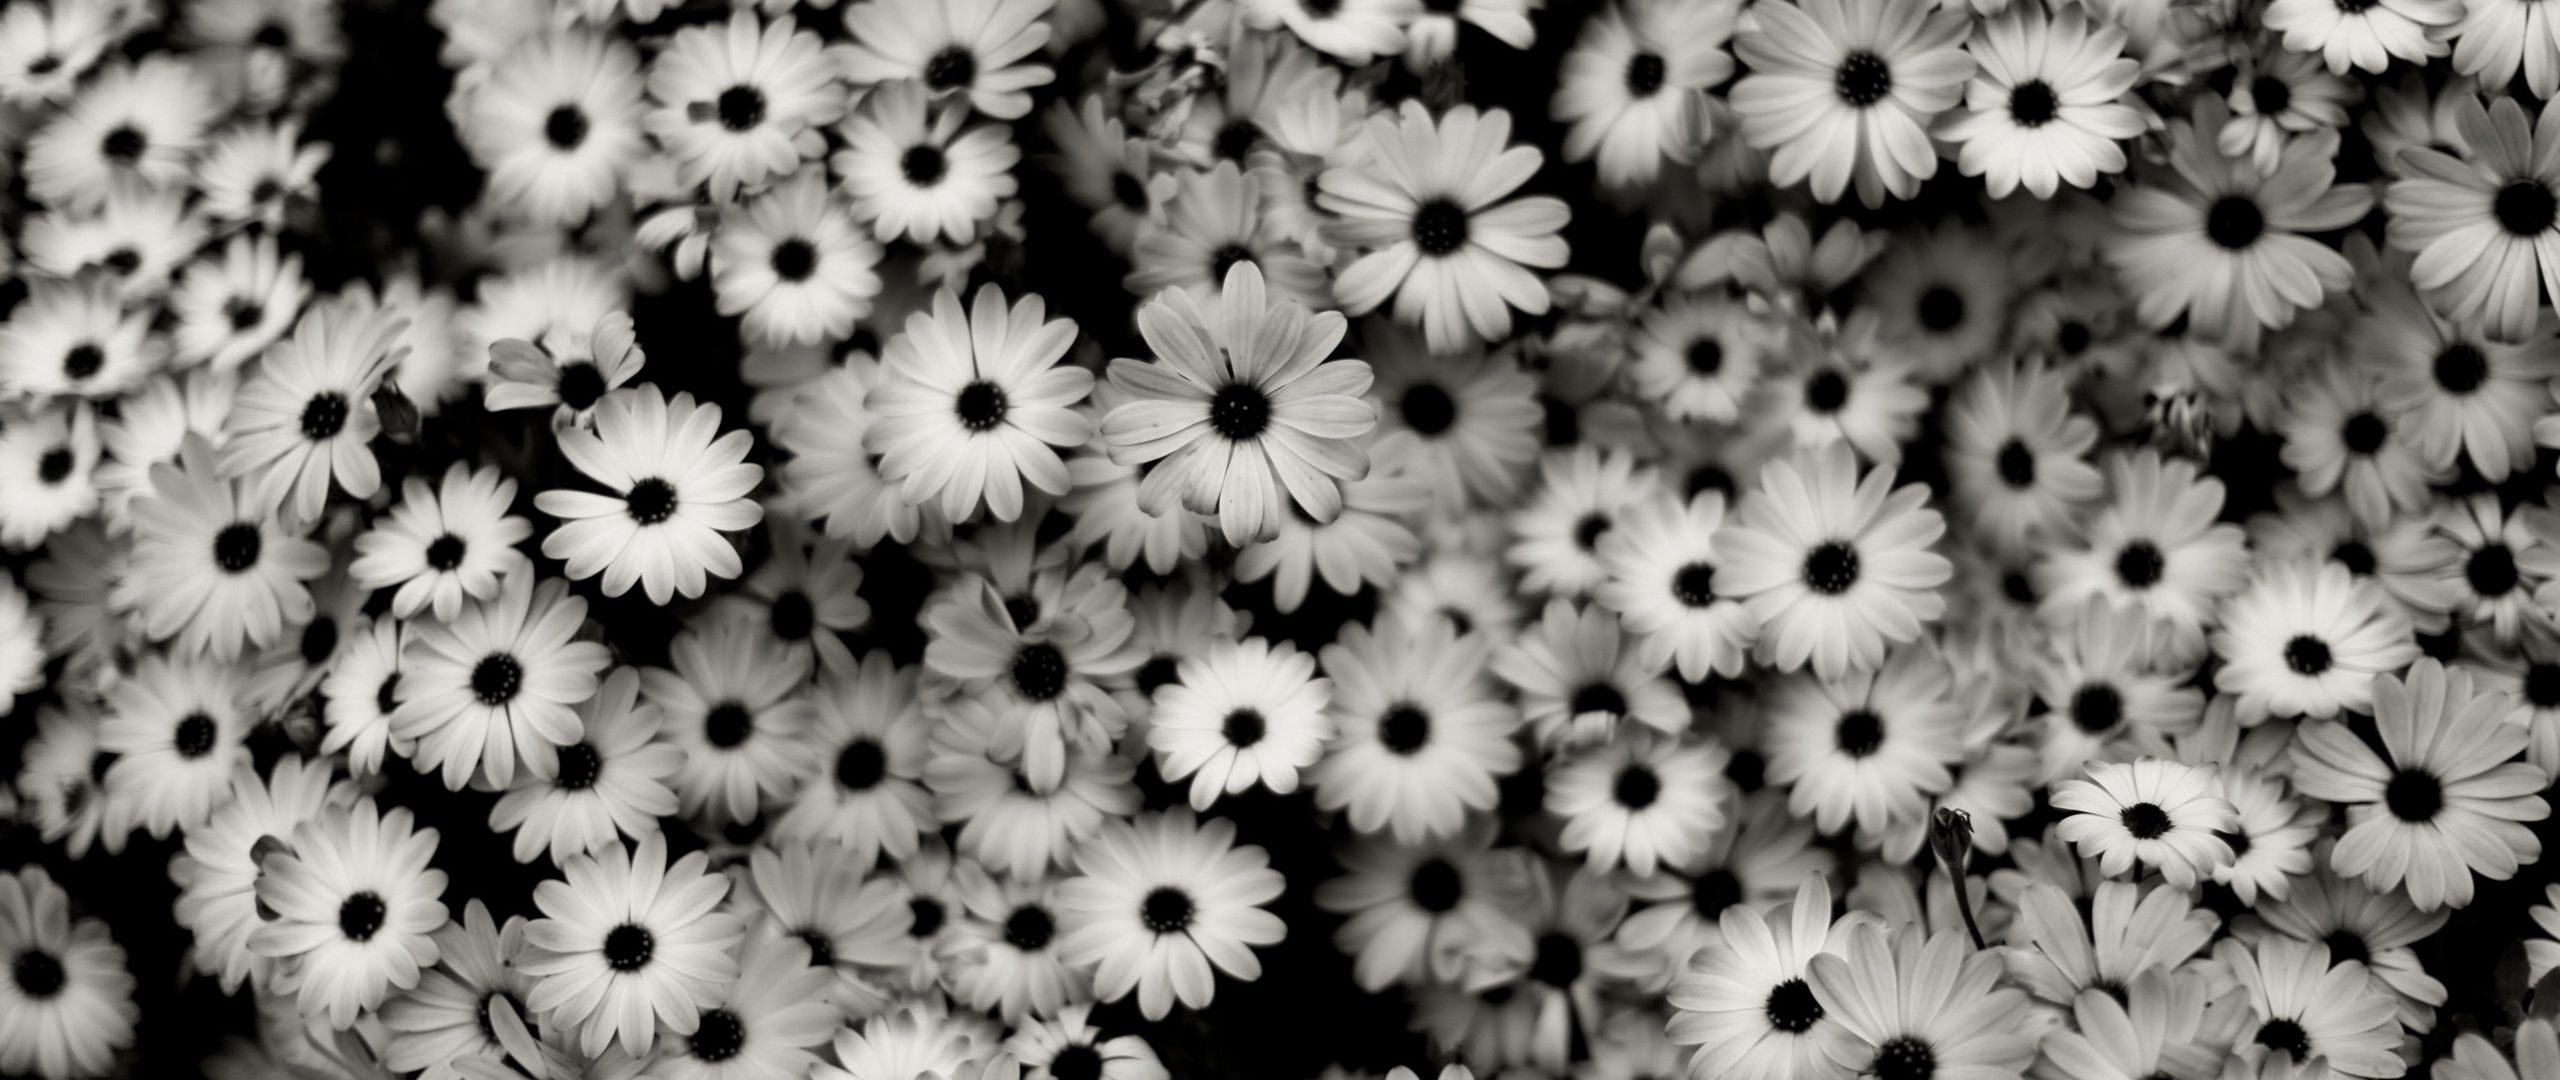 Download wallpaper 2560x1080 black white, flowers, grey, daisies dual wide 1080p HD background